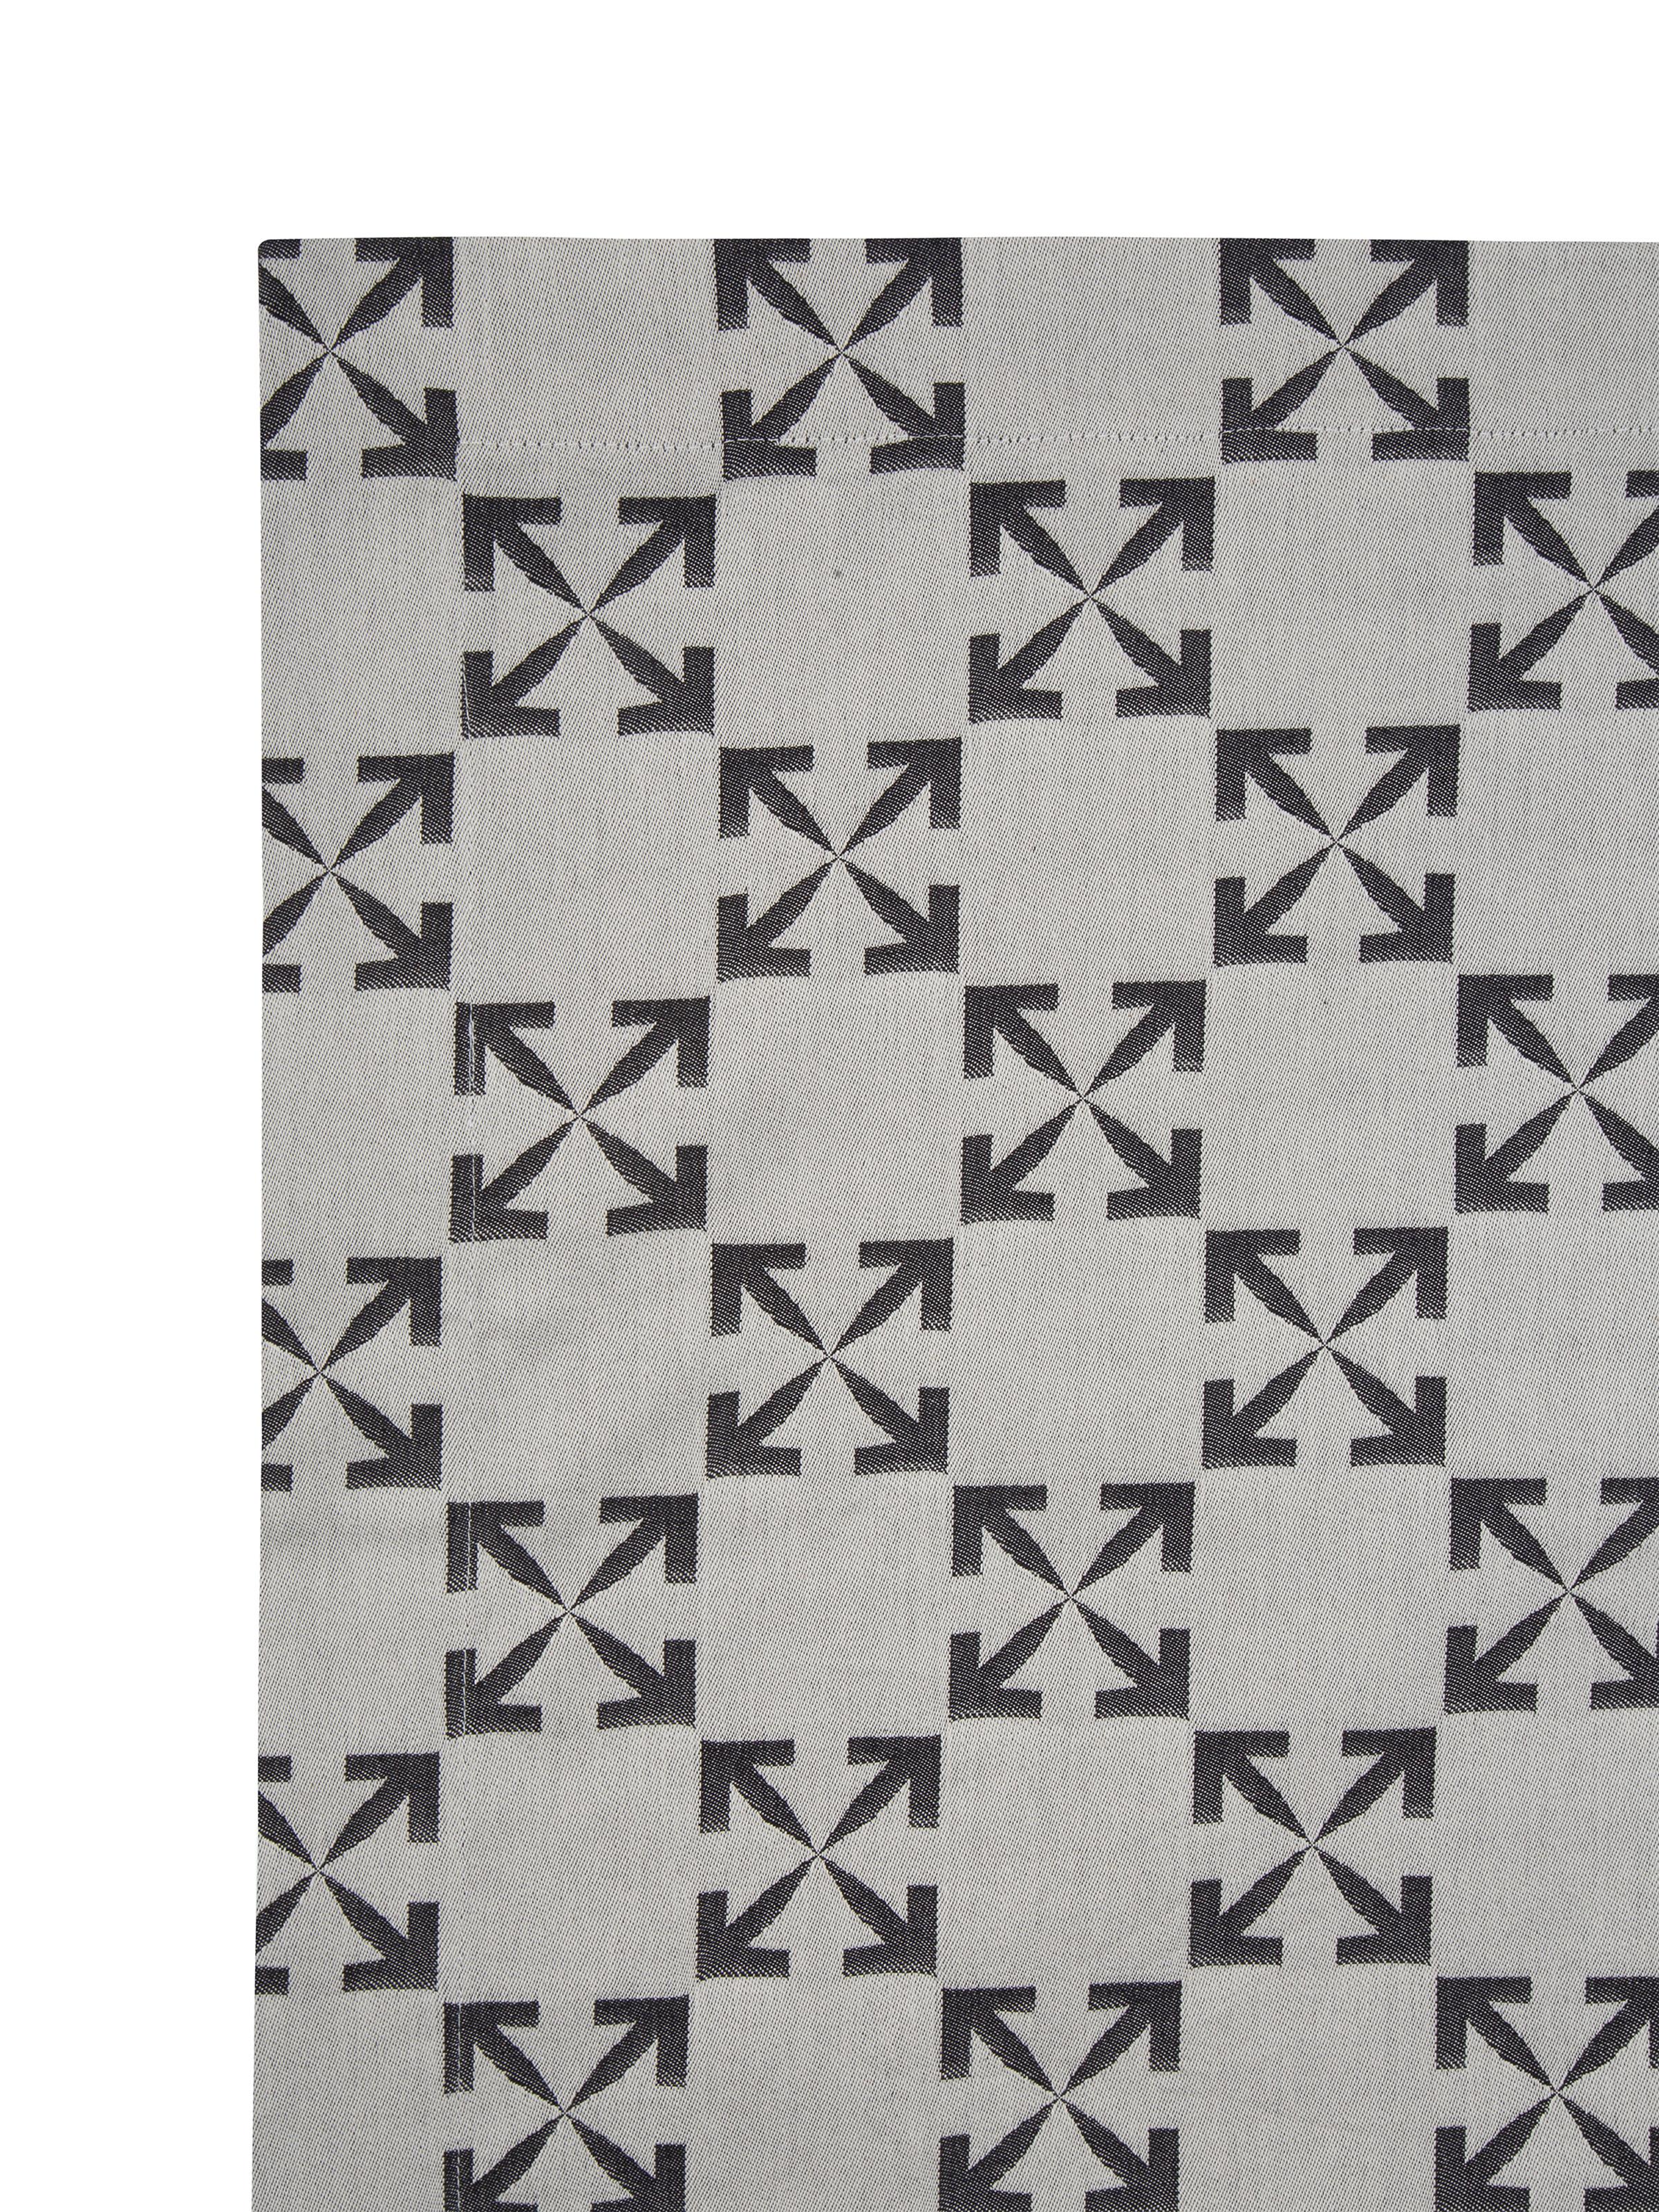 Italian Off-White Arrow Pattern Table Cloth White Black For Sale